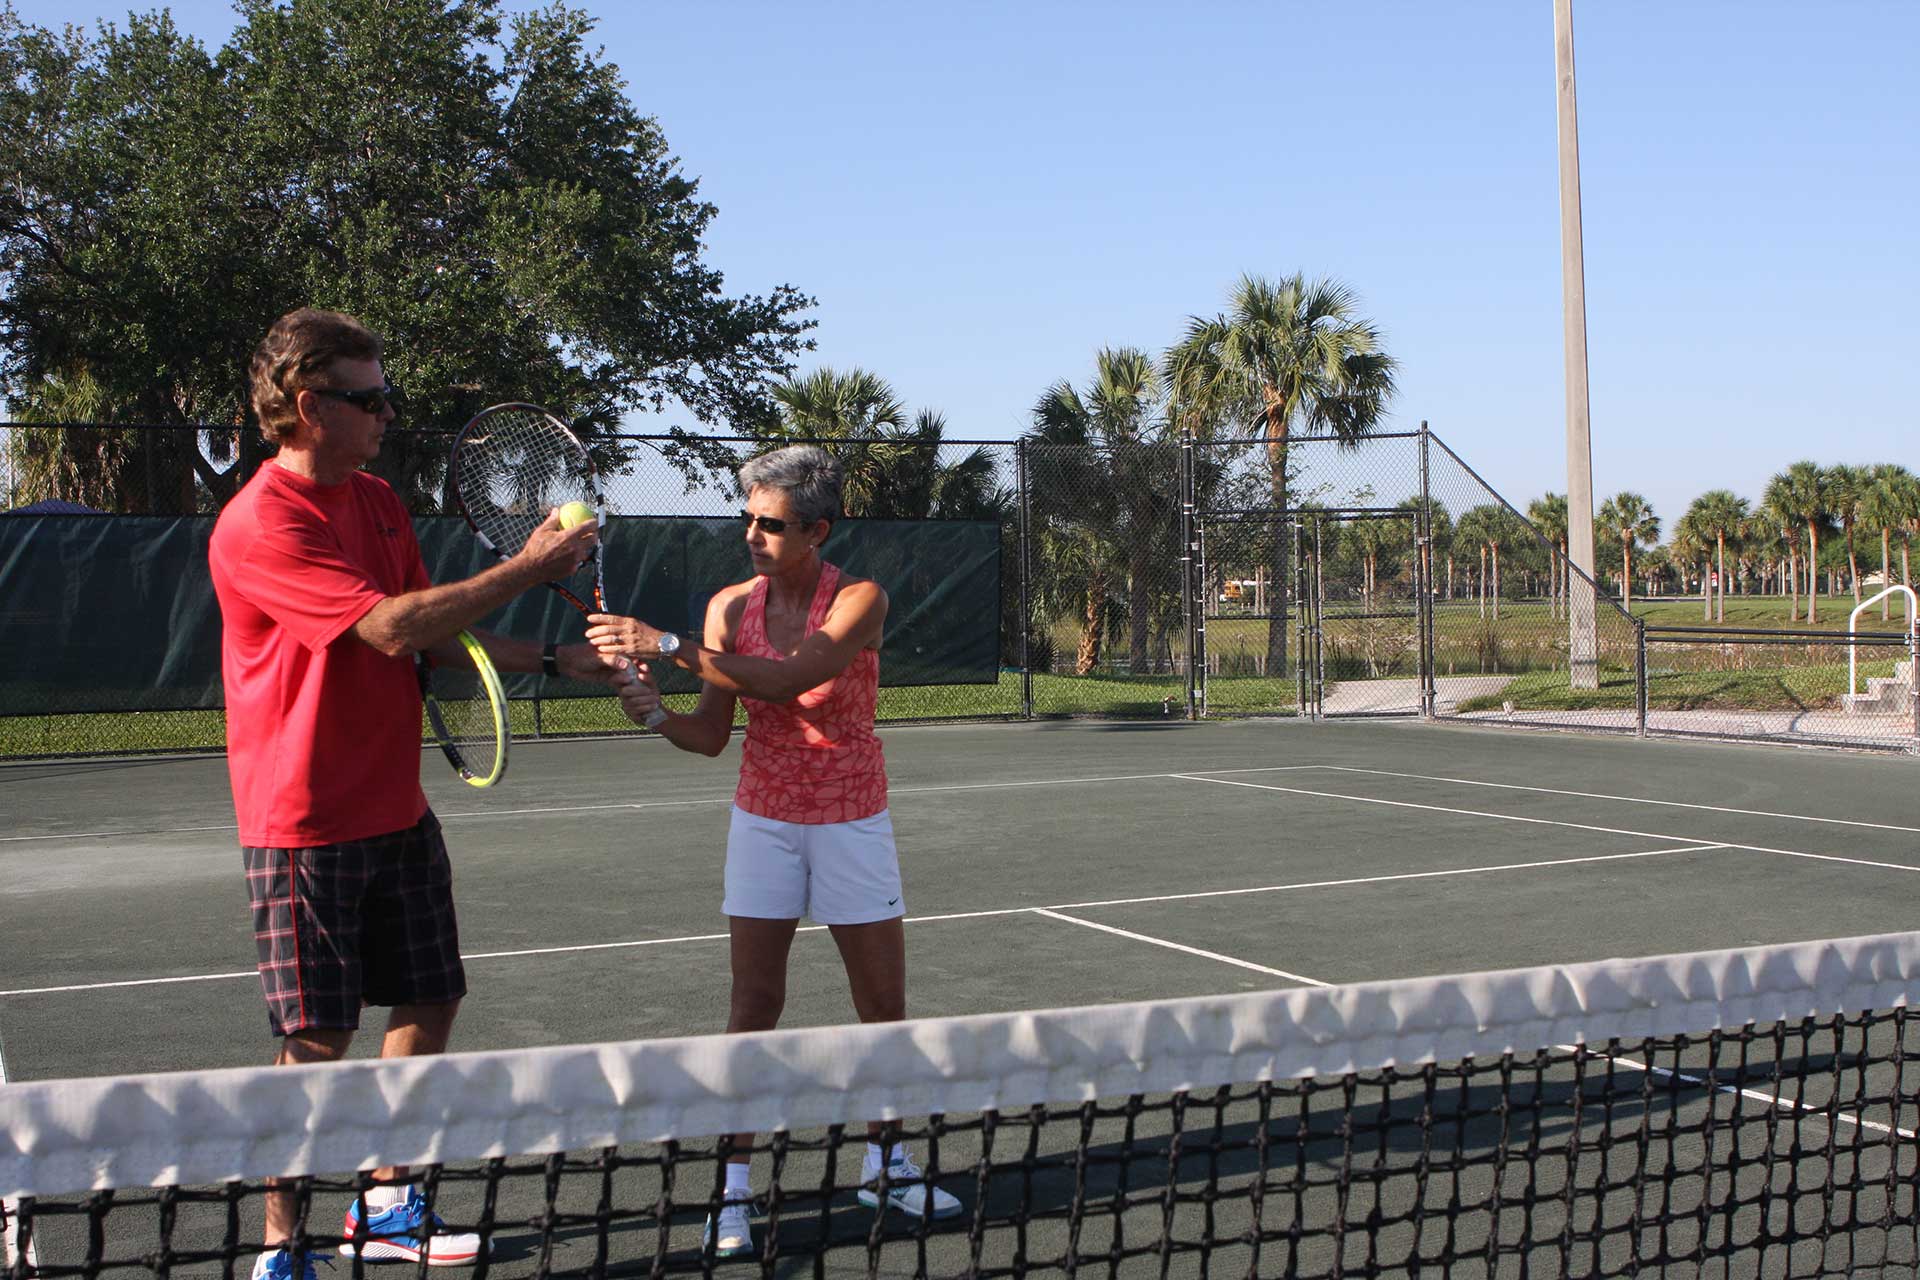 Tennis Instructor with Tennis Player Student on Court